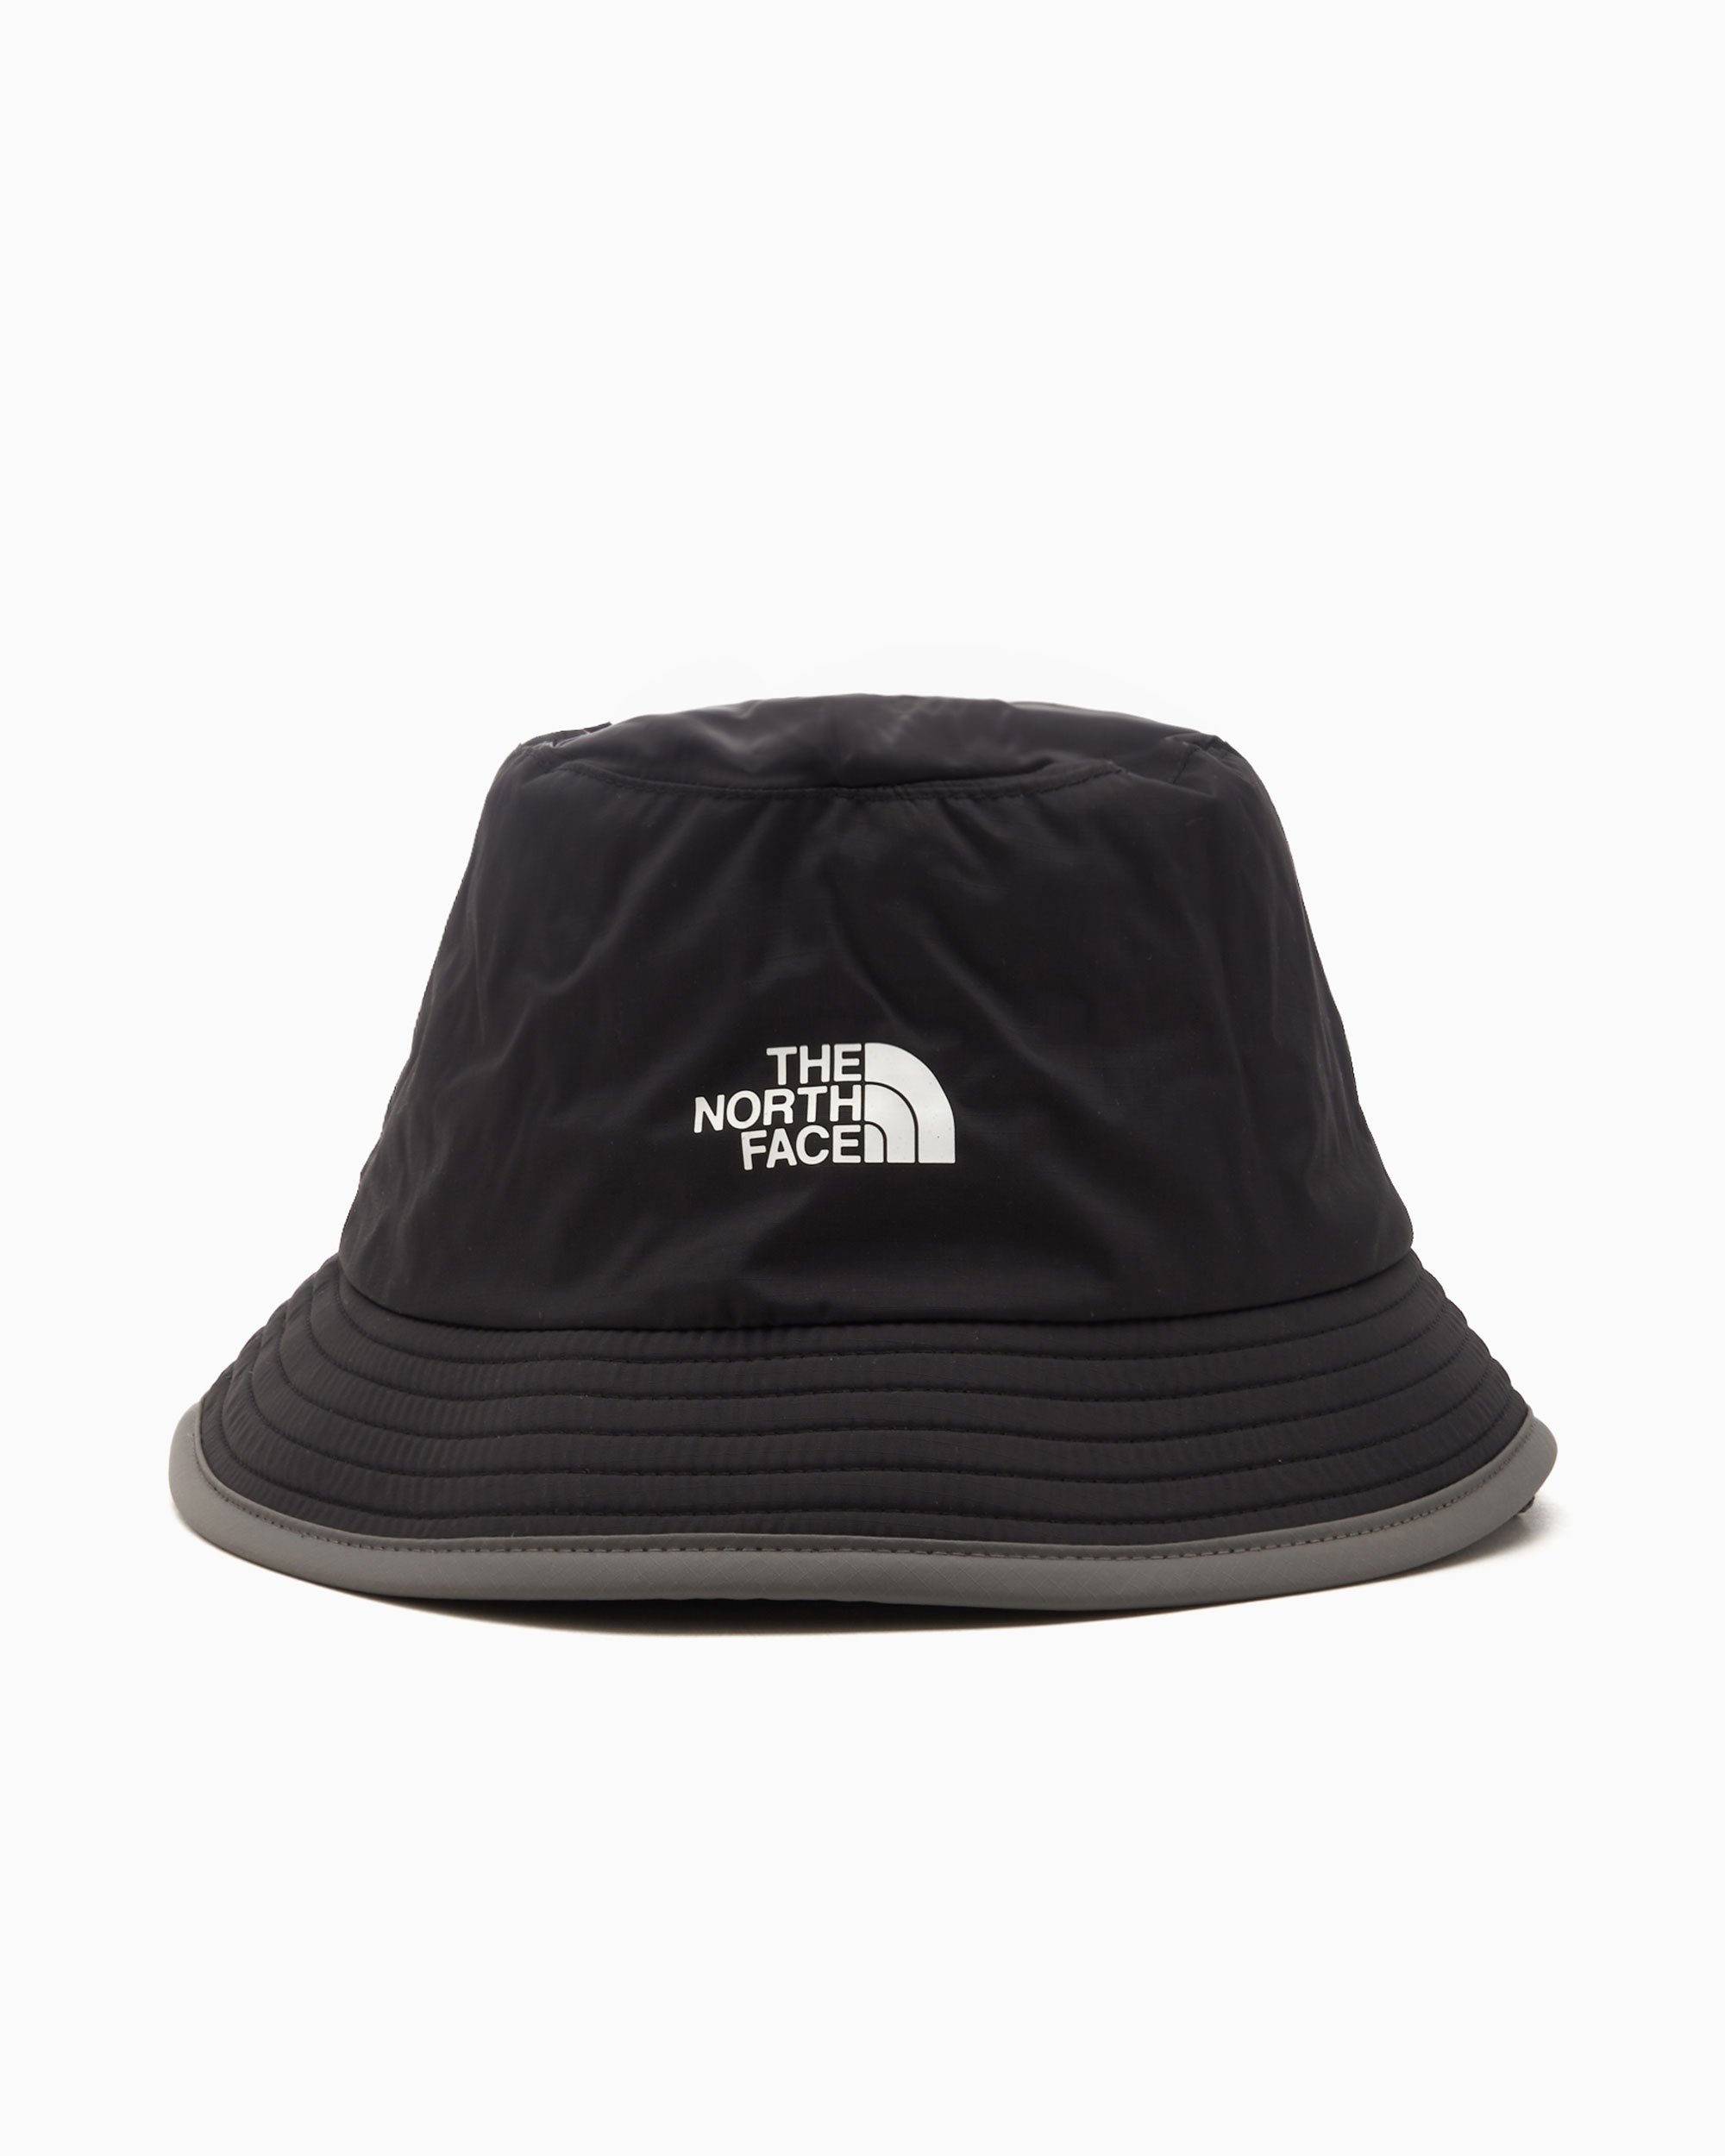 The North Face x Undercover Soukuu Unisex Hike Sun Brimmer Hat